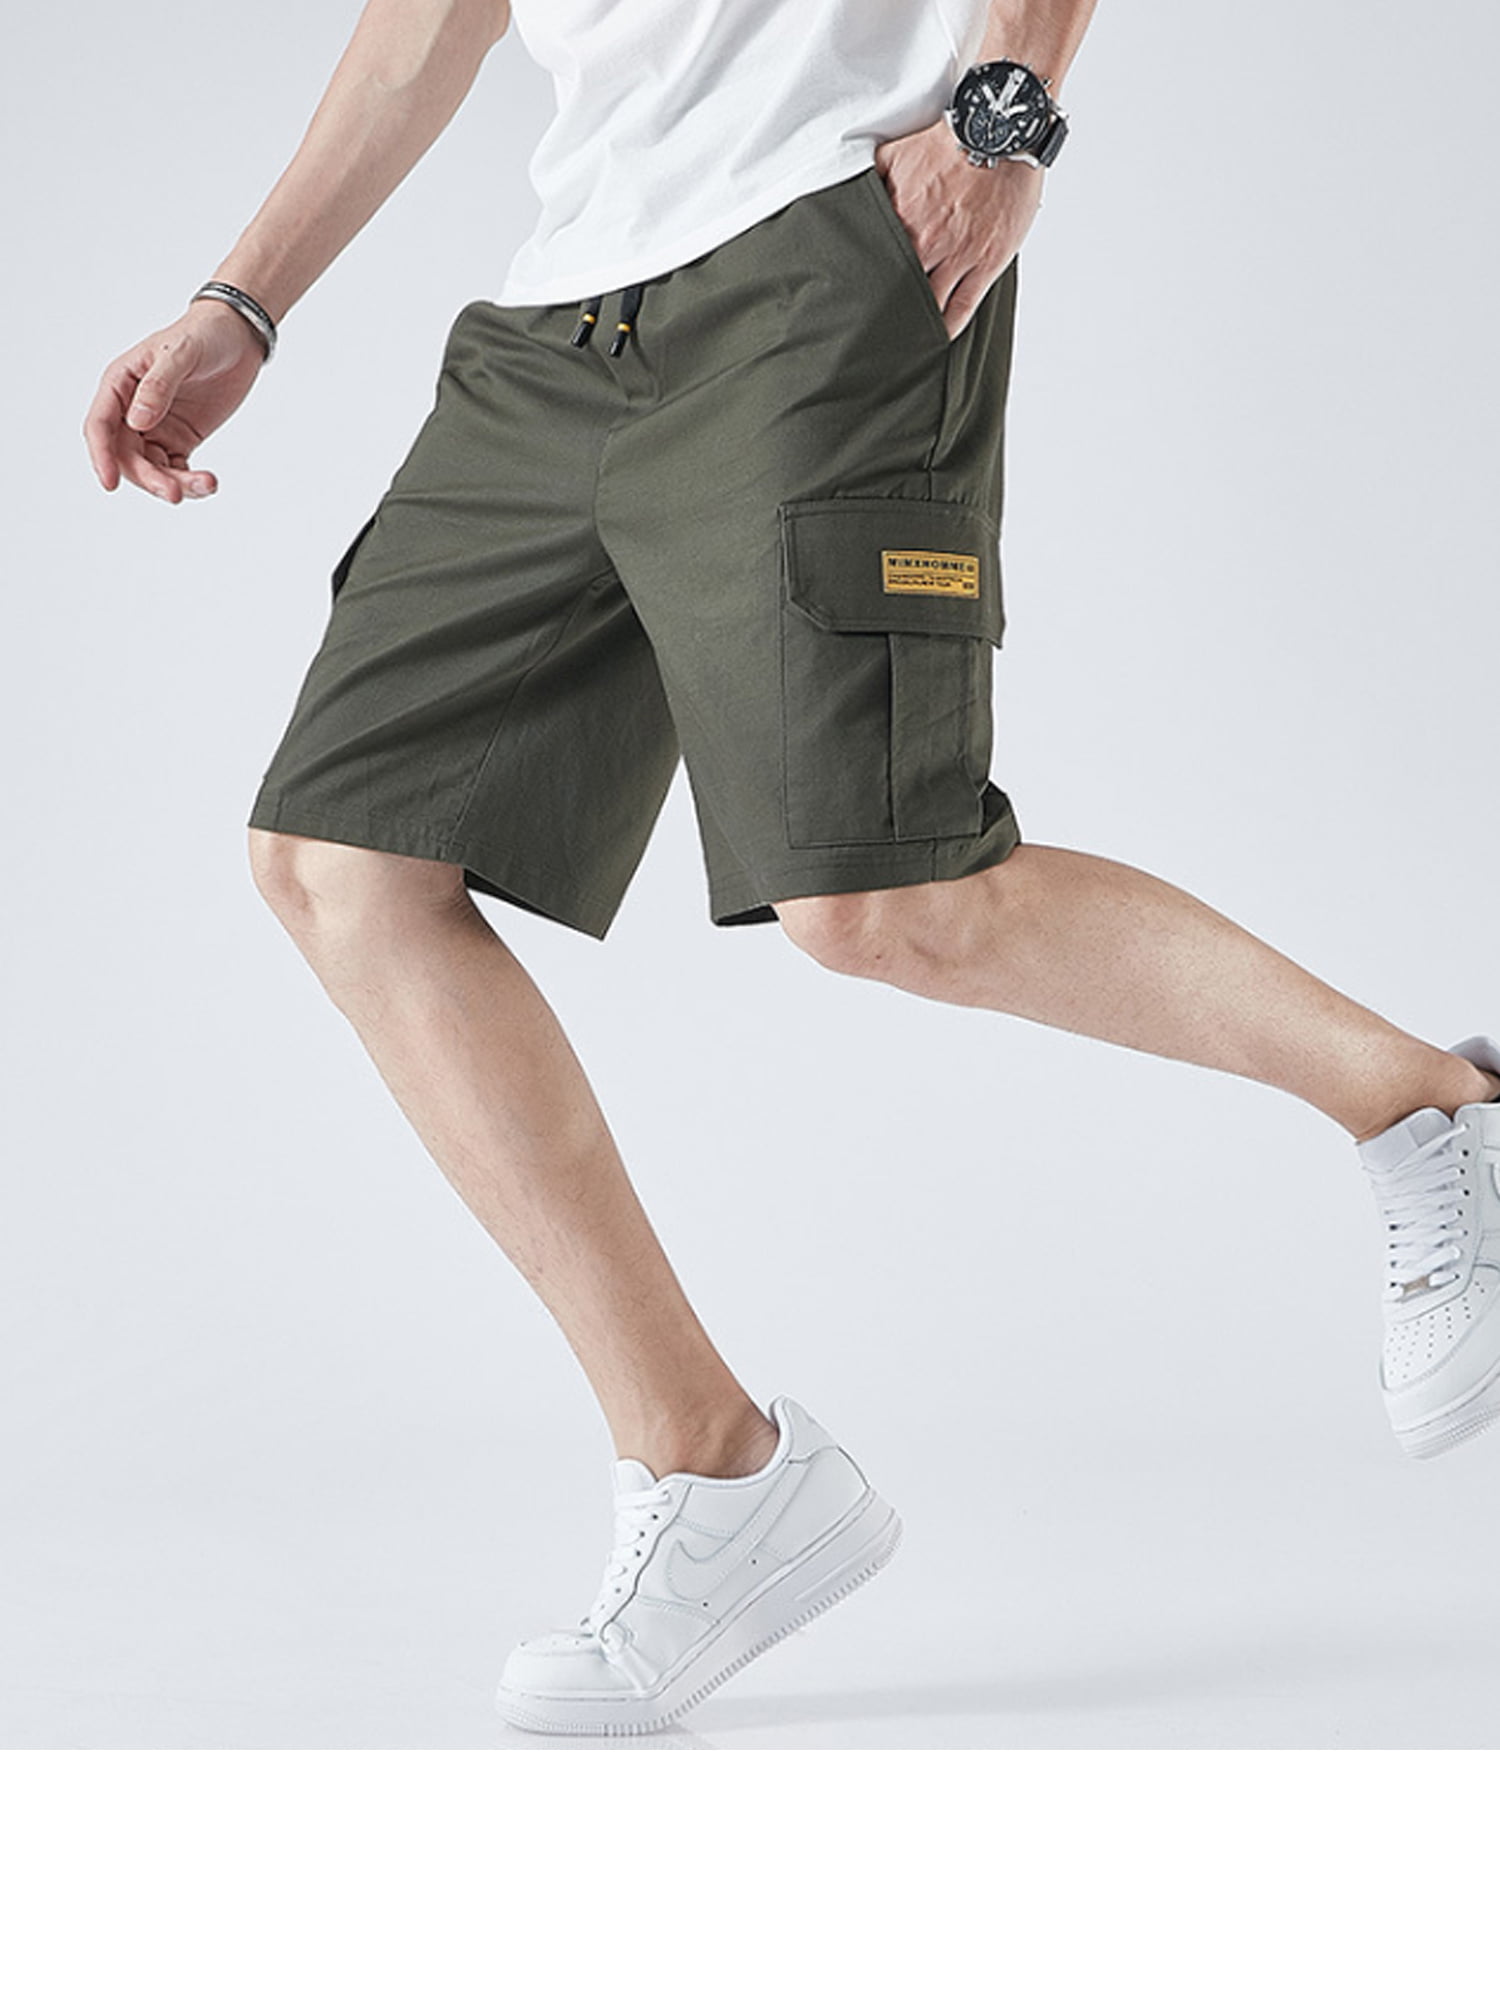 PARKLEES Mens Hipster Multi Pocket Design Loose Fit Cotton Casual Cargo Shorts